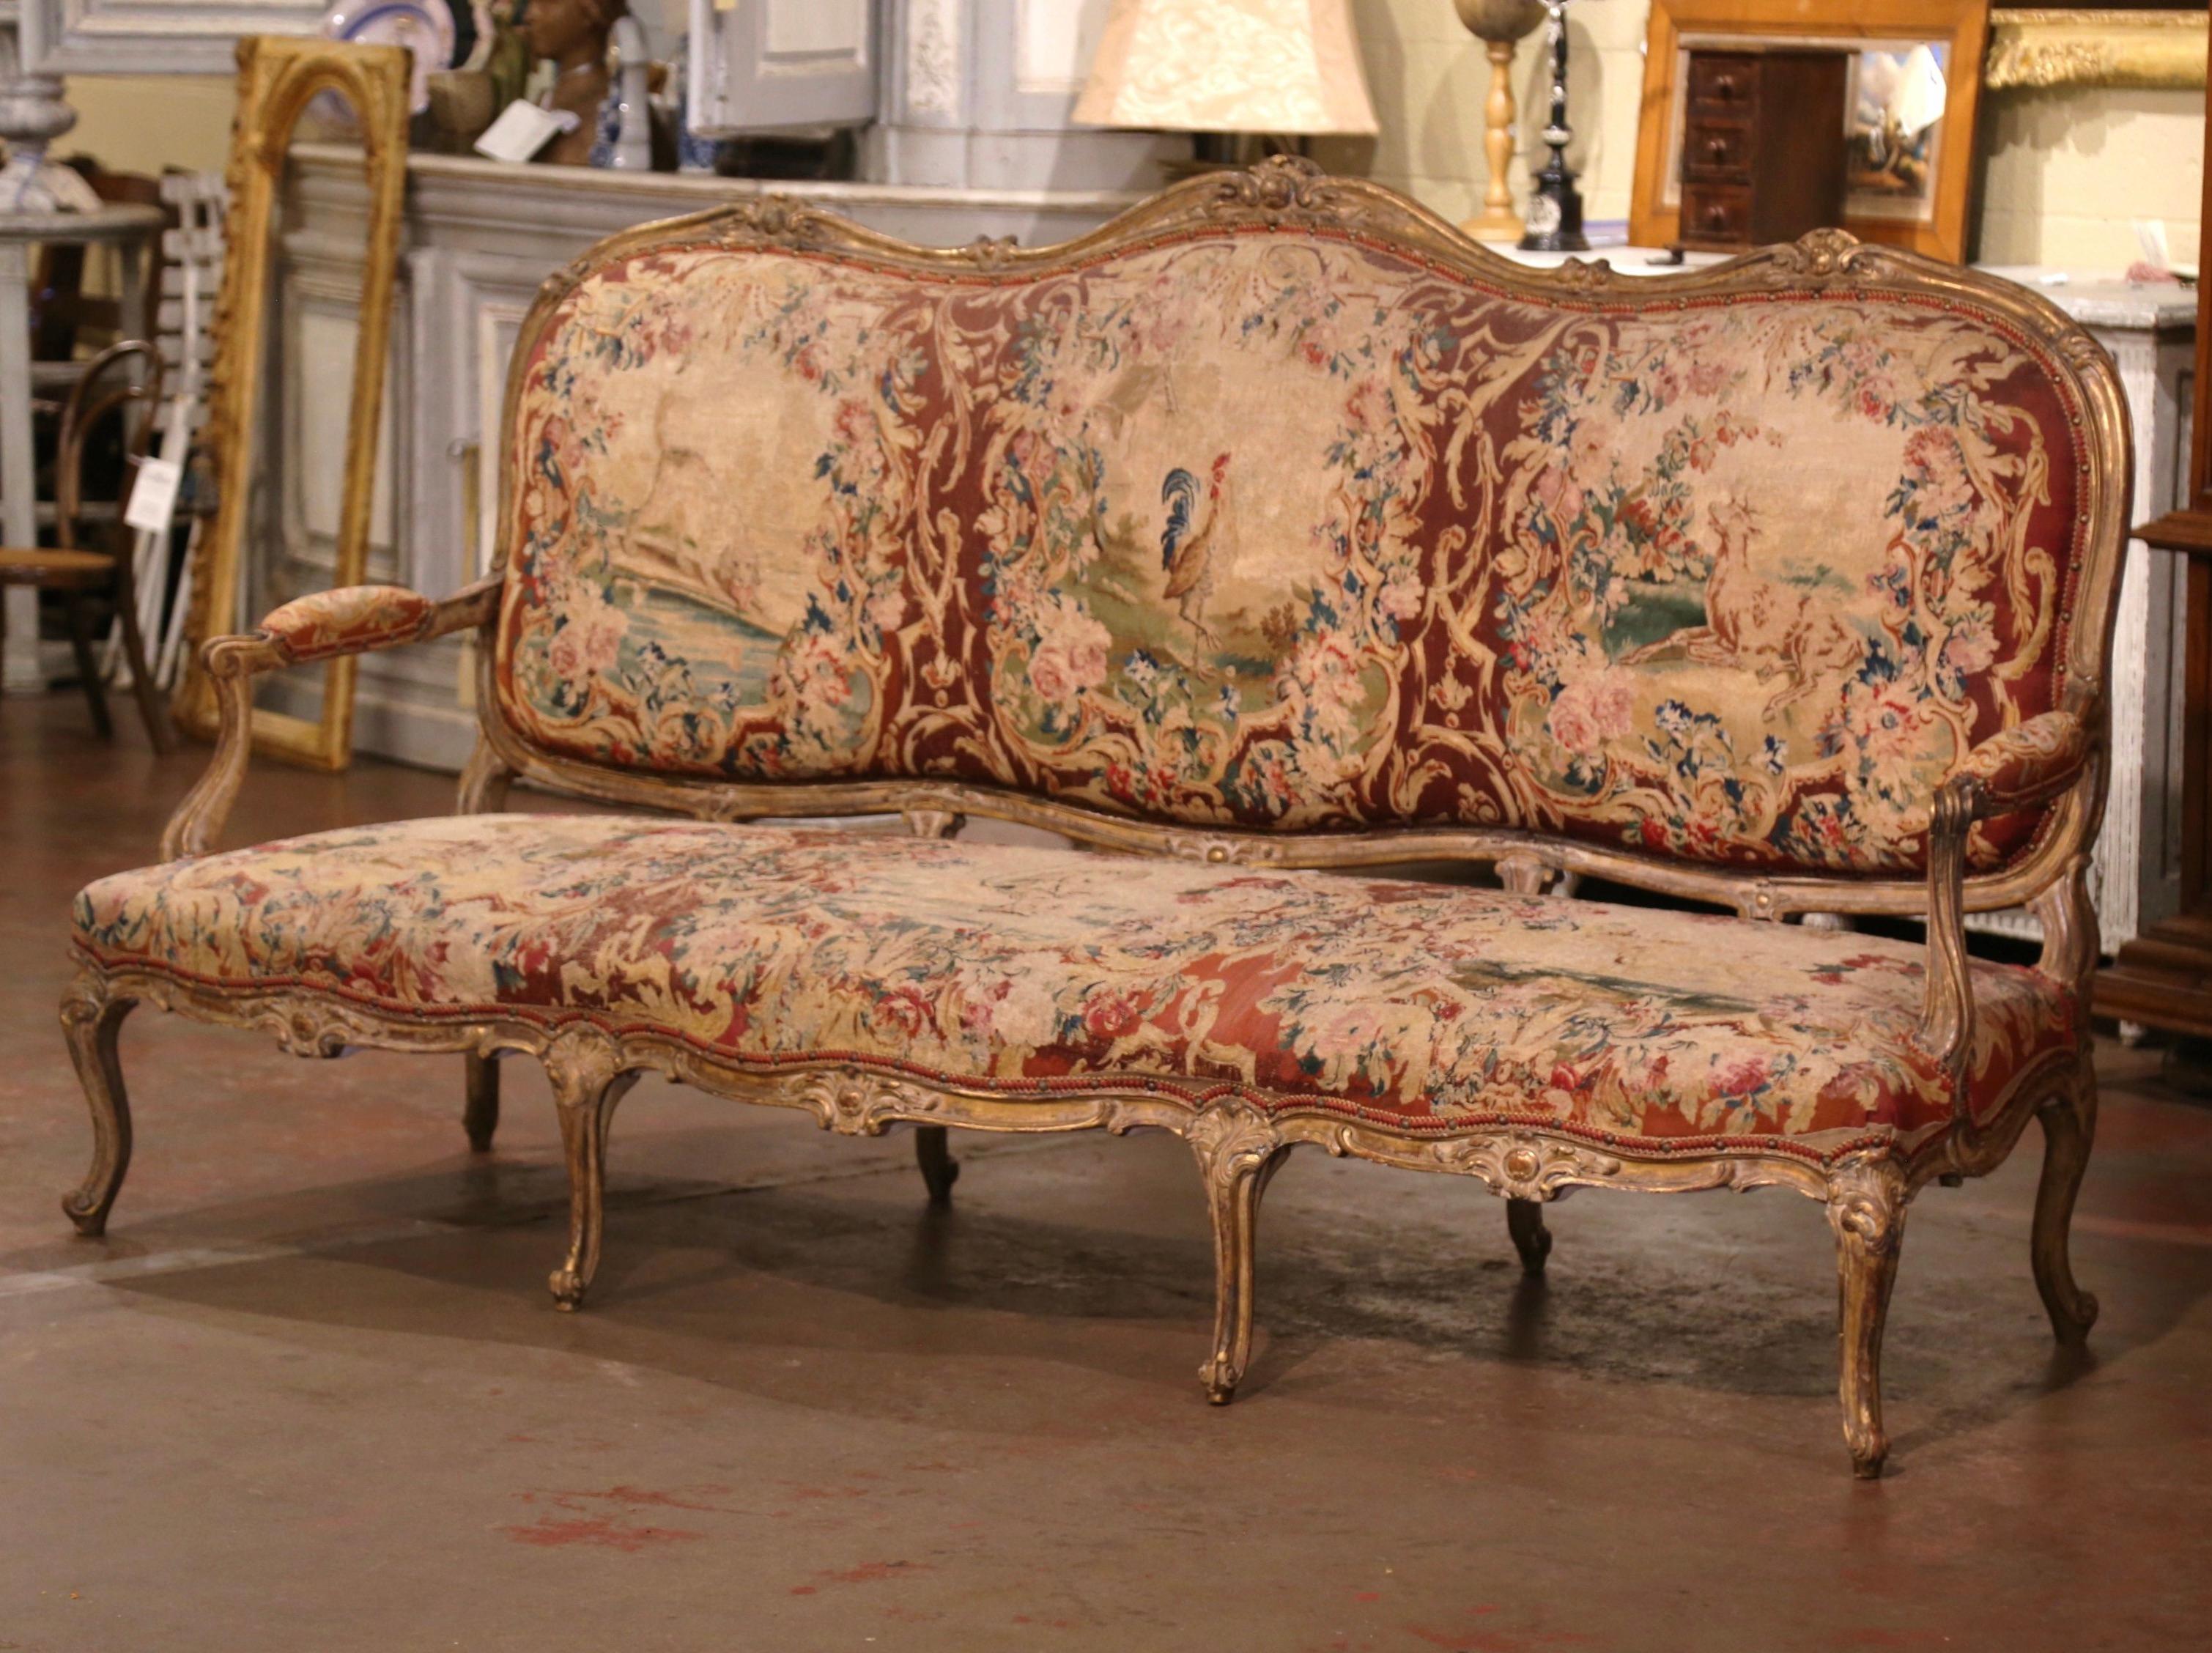 18th Century French Louis XV Carved Giltwood Canapé with Aubusson Tapestry In Excellent Condition For Sale In Dallas, TX